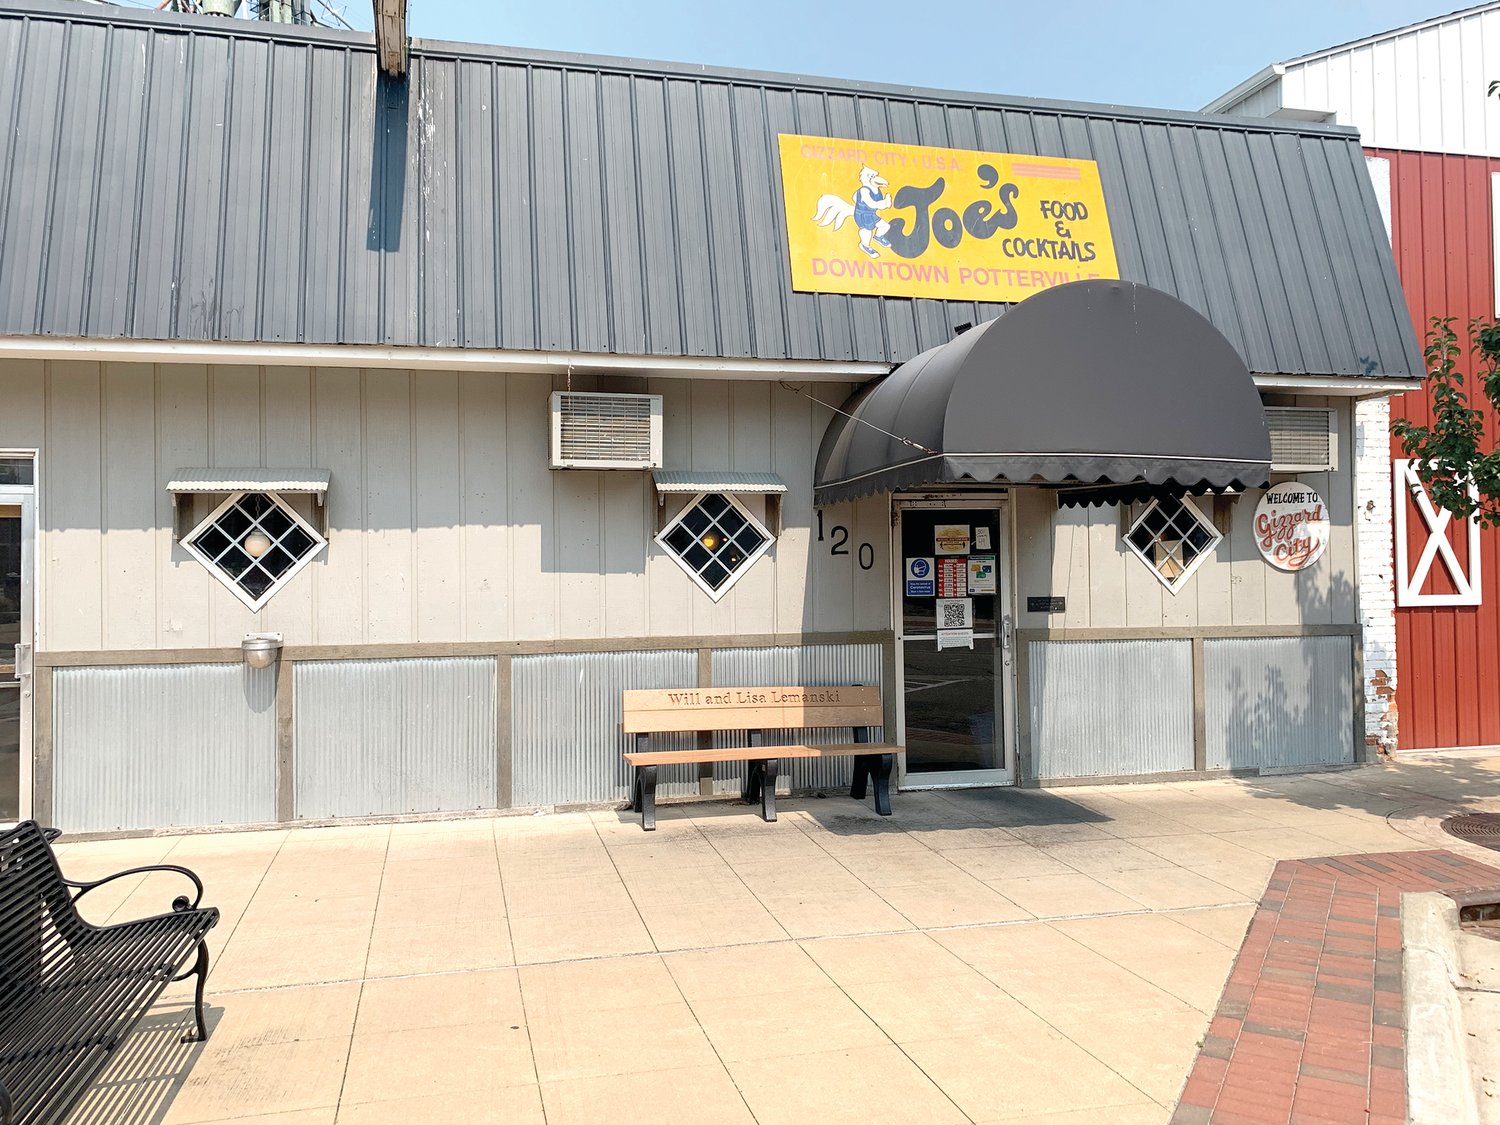 Joe Bristol, the owner of Joe’s Gizzard City in Potterville, claims all eight of his employees are medically exempt from wearing face coverings.